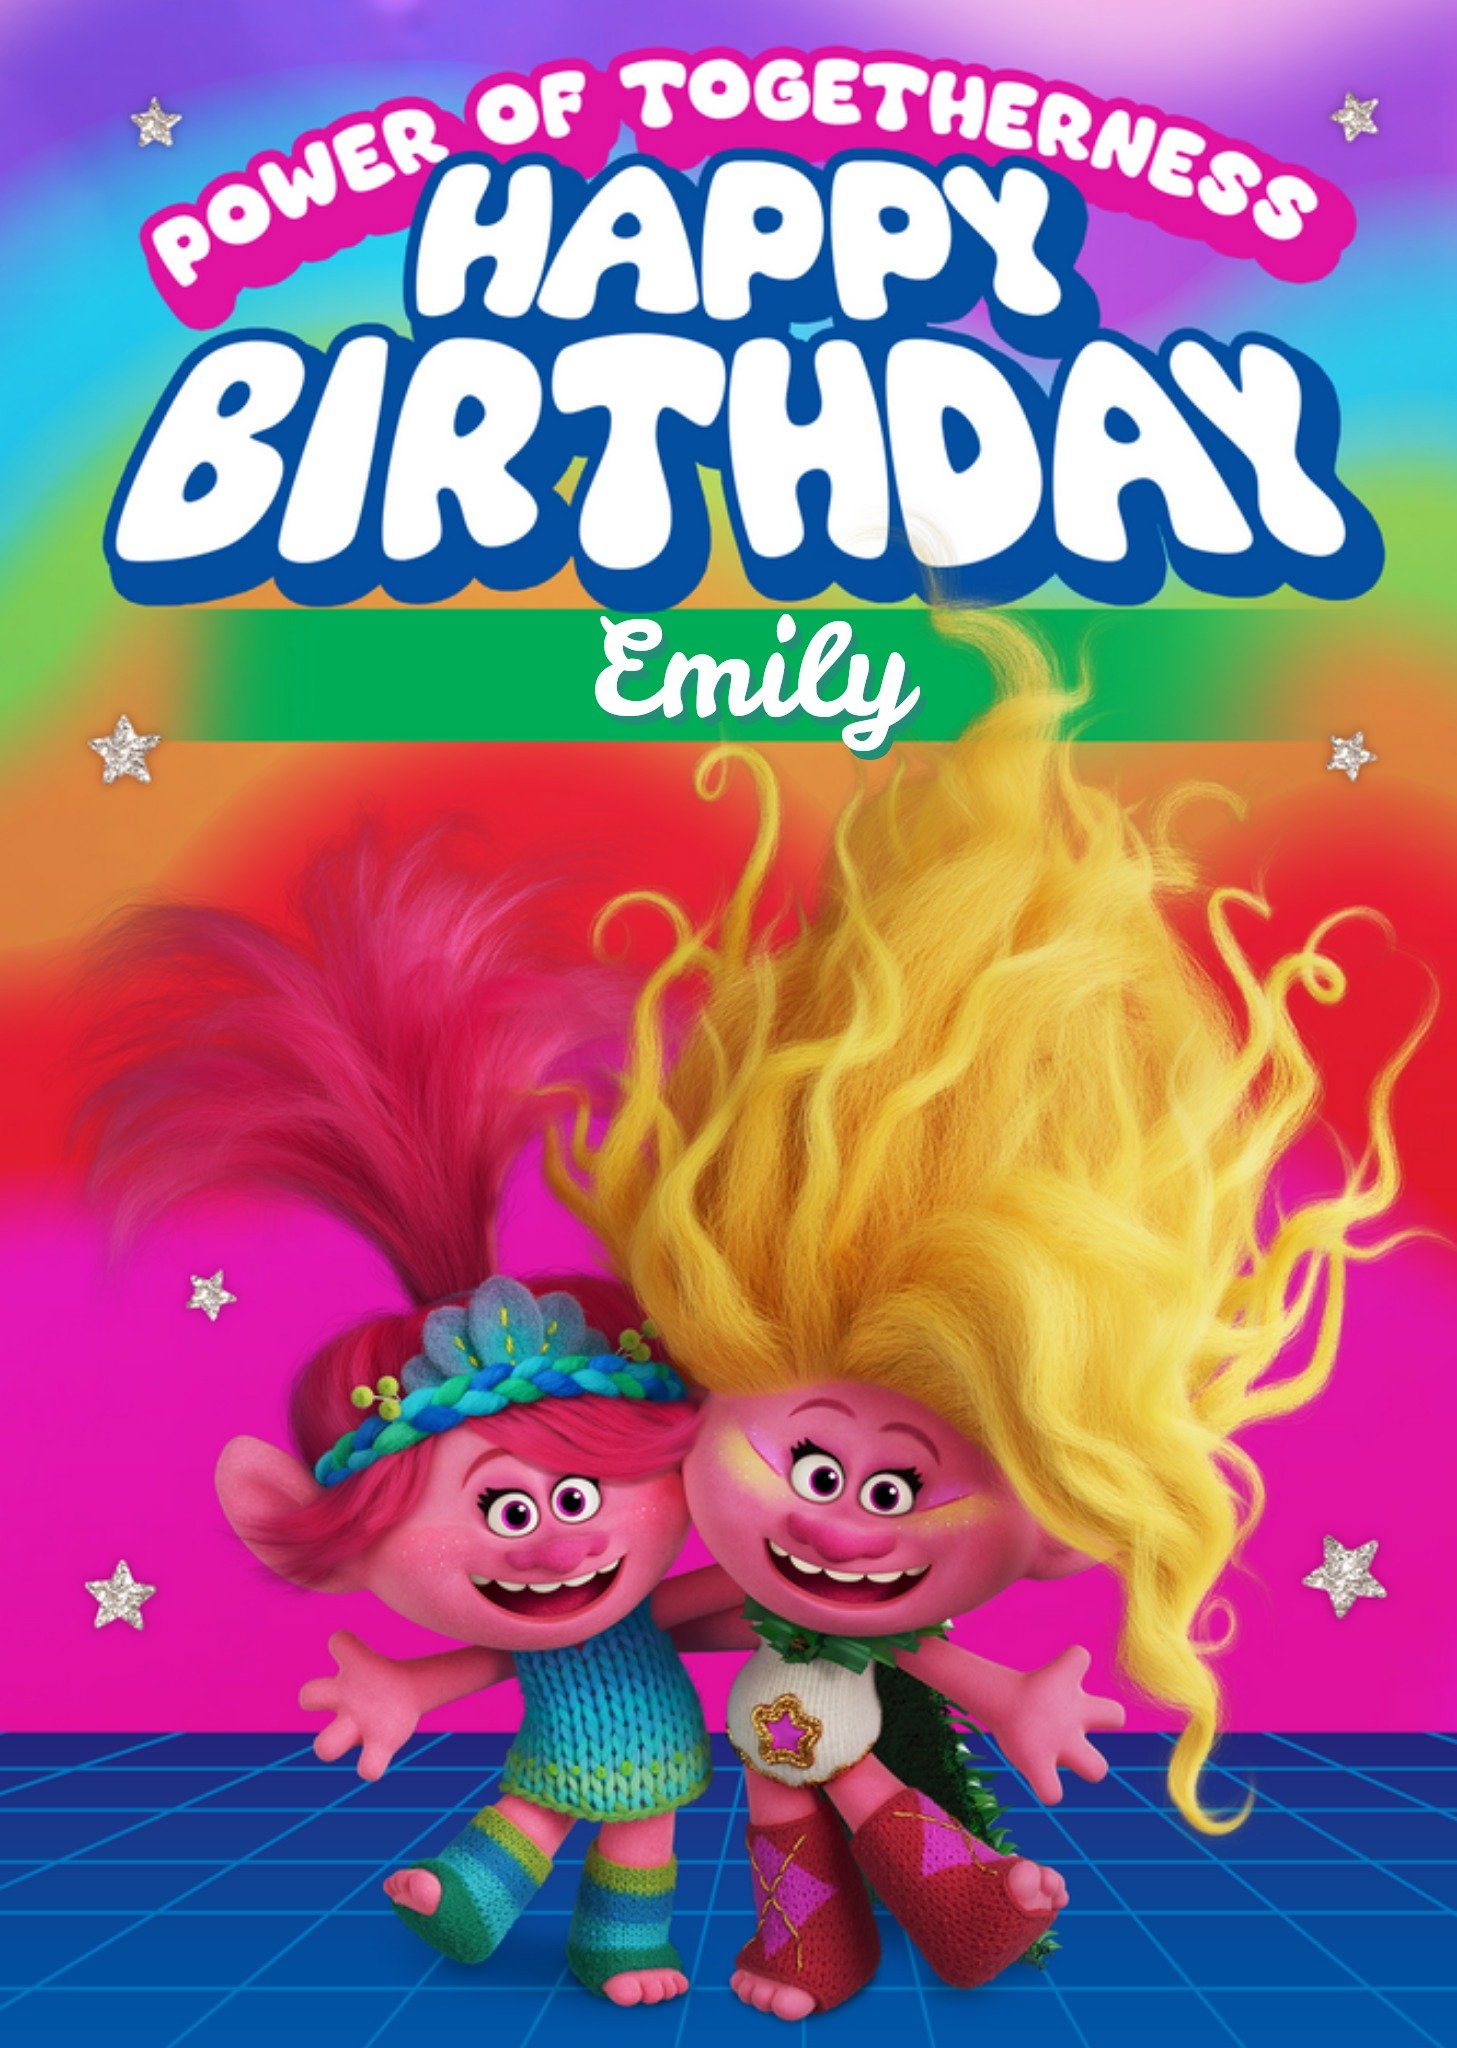 Trolls Power Of Togetherness Birthday Card, Large